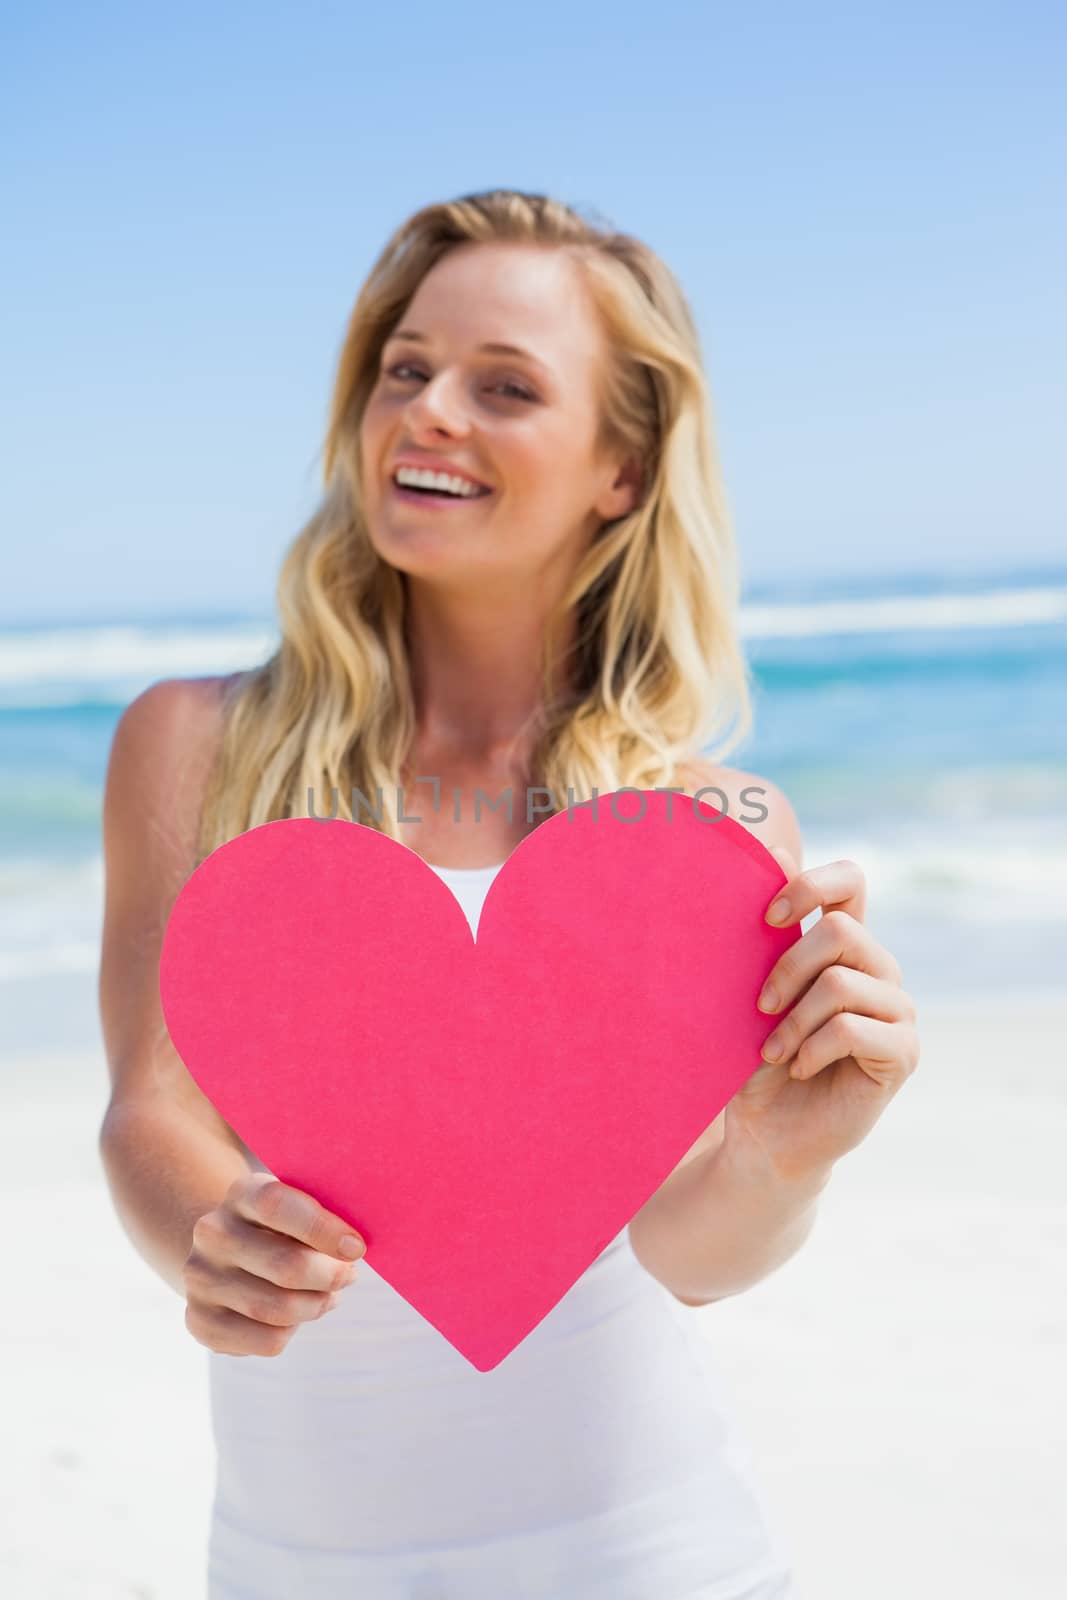 Smiling blonde showing pink heart on the beach by Wavebreakmedia